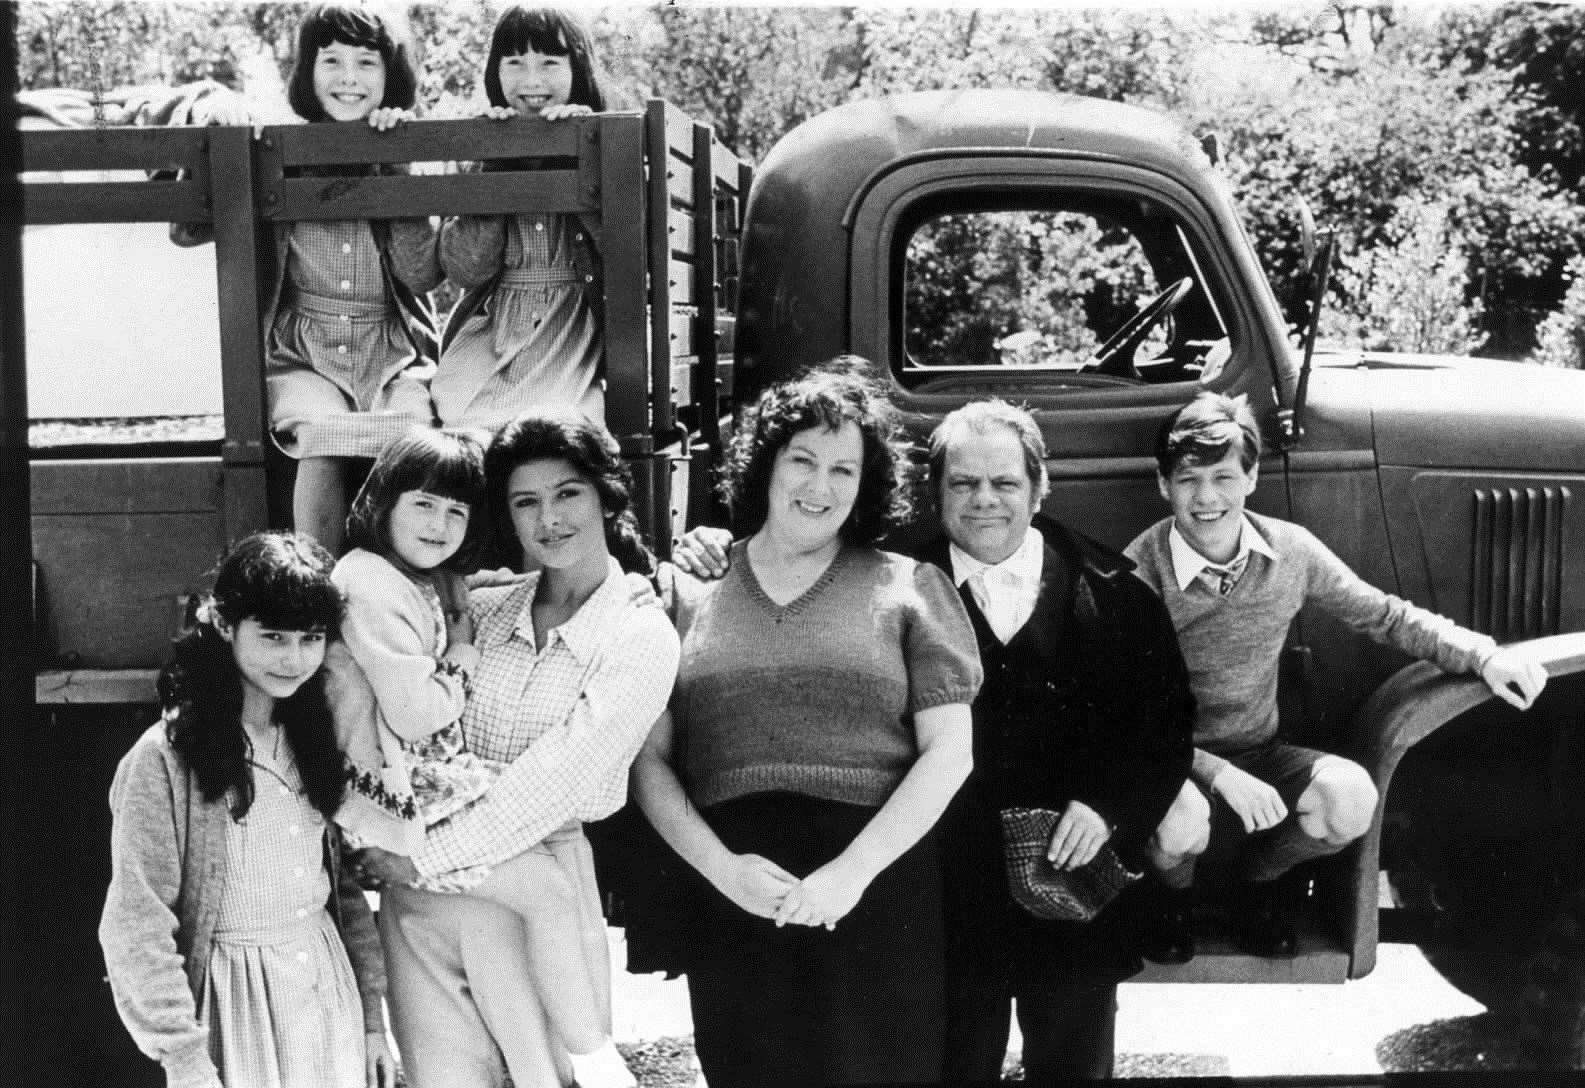 The Darling Buds of May was filmed in and around the village of Pluckley in the early 1990s. This picture of the Larkin brood with David Jason as Pop and Pam Ferris as Ma was taken on April 4, 1991